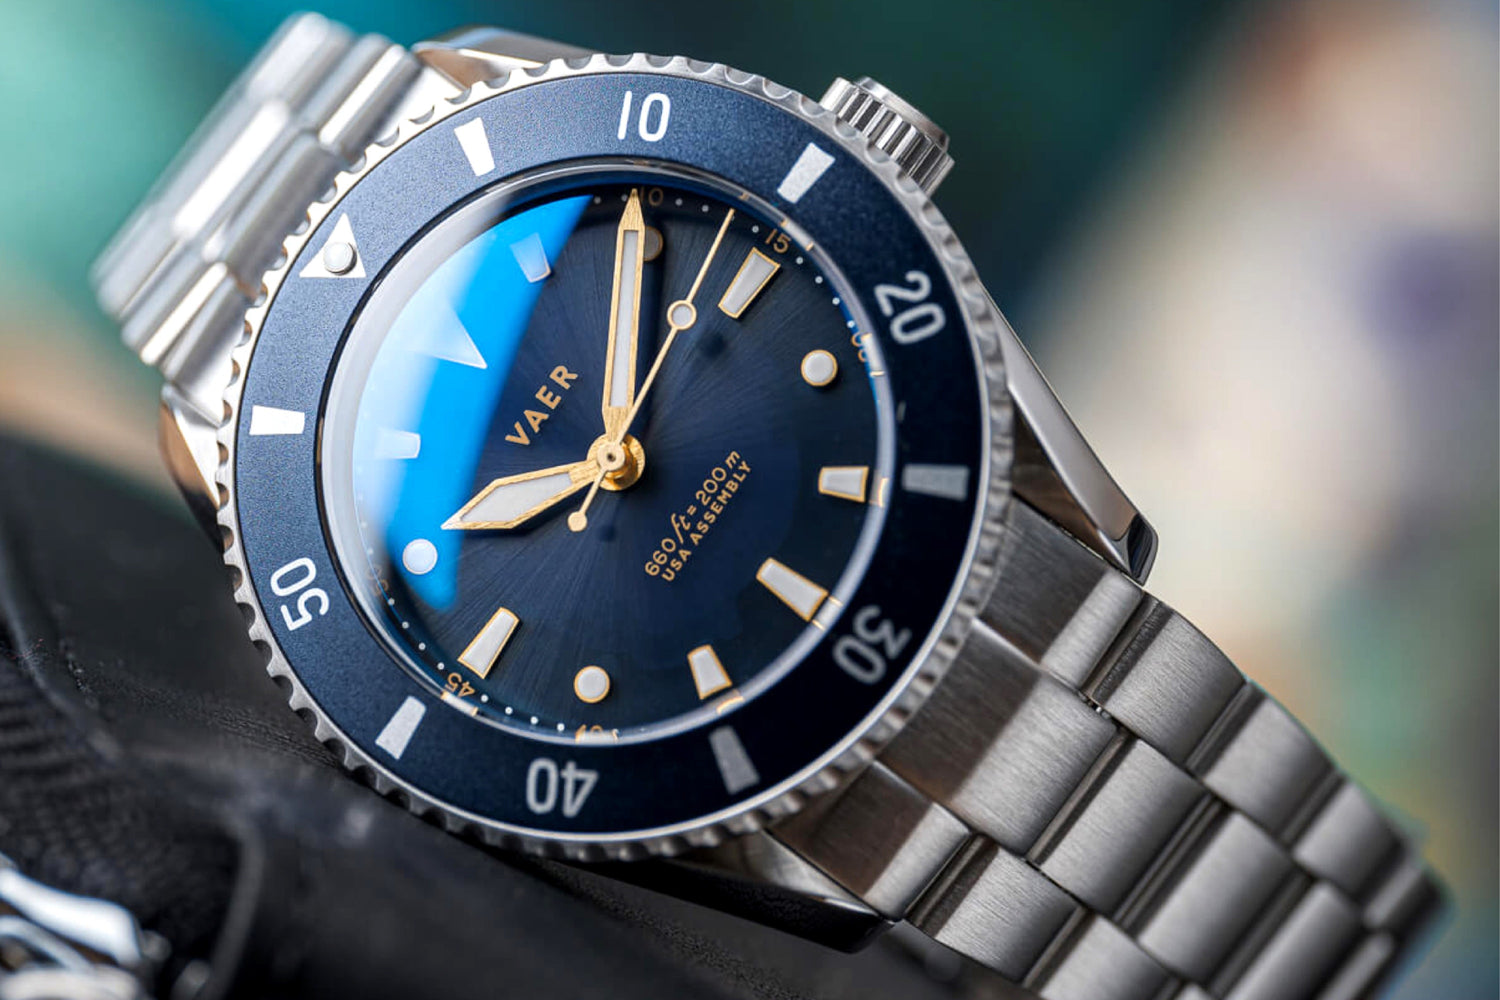 Why Does Sapphire Crystal Matter in Watches?